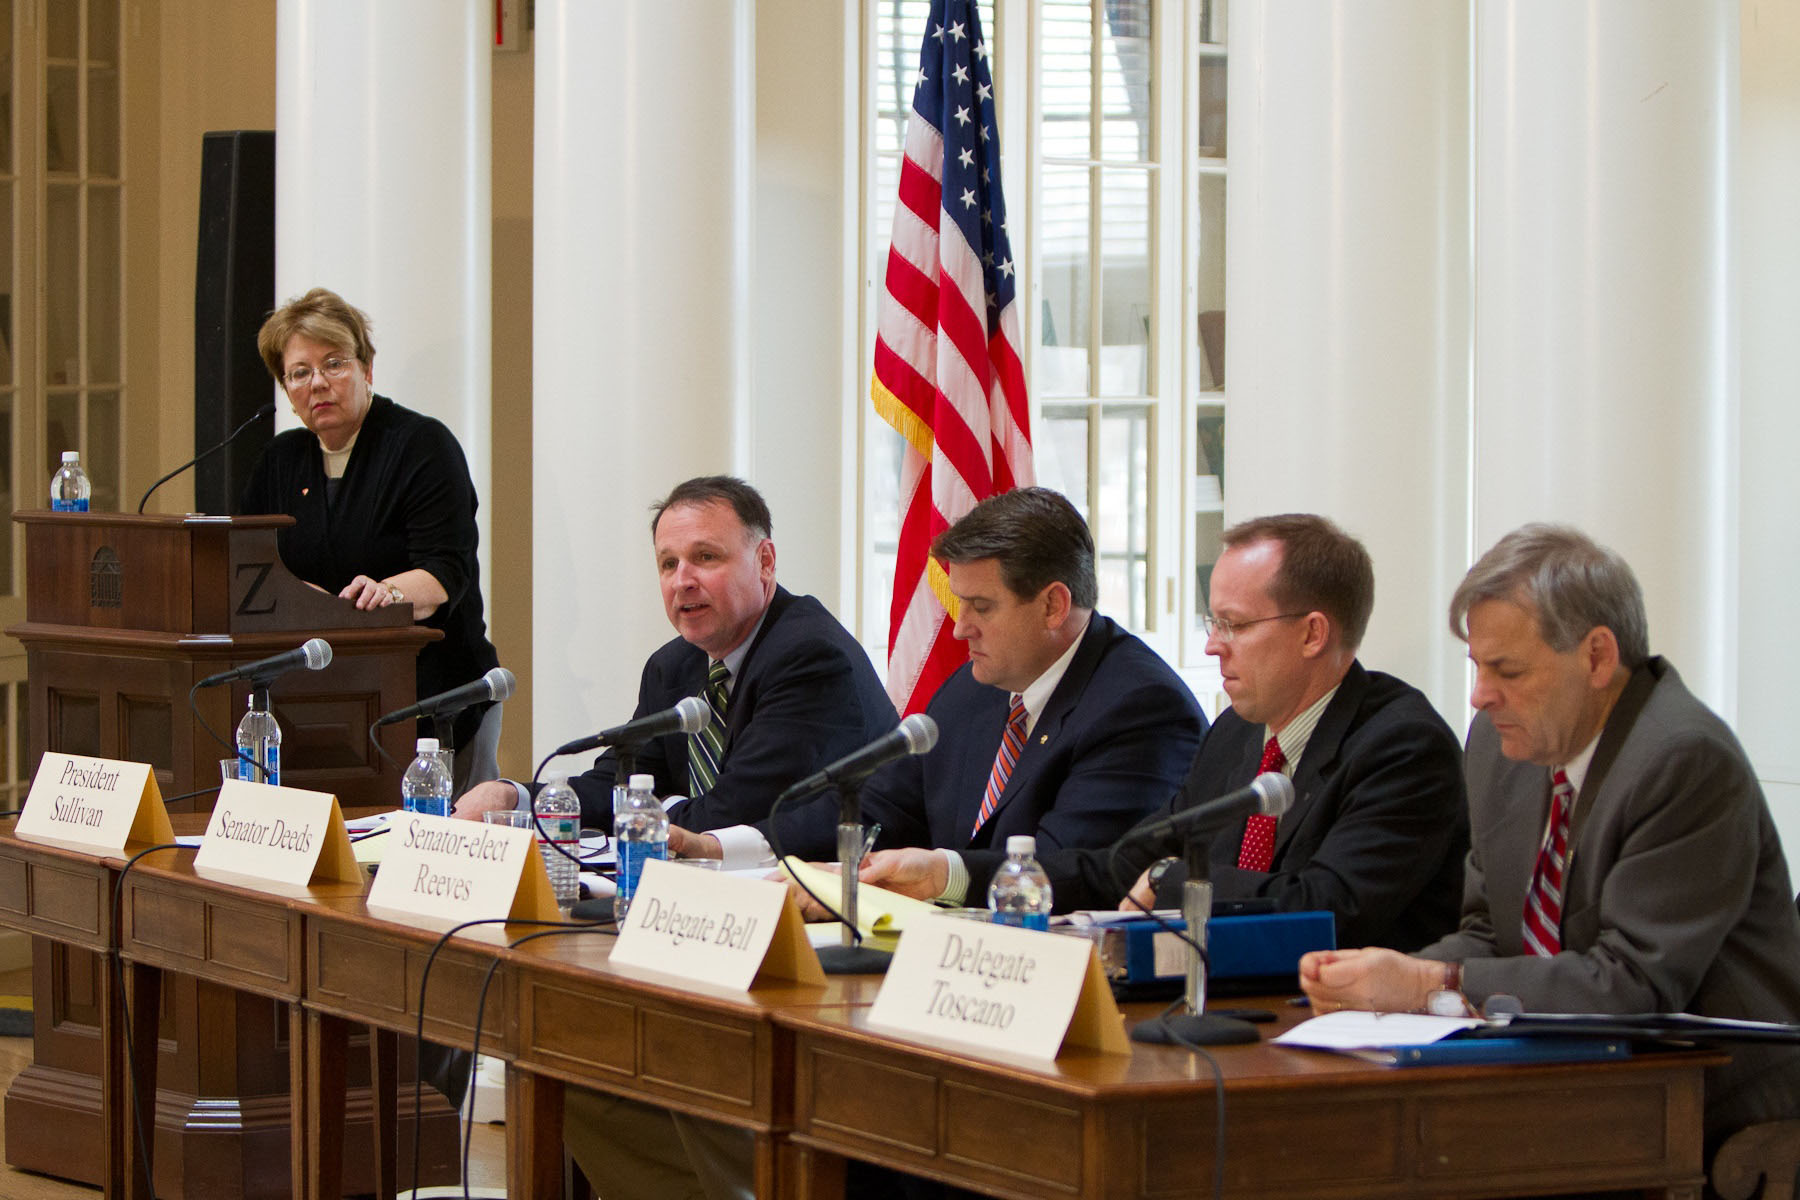 Panelists from left to right: President Teresa A. Sullivan, State Sen. Creigh Deeds,  Sen.-elect Bryce Reeves, Robert Bell, and David Toscano